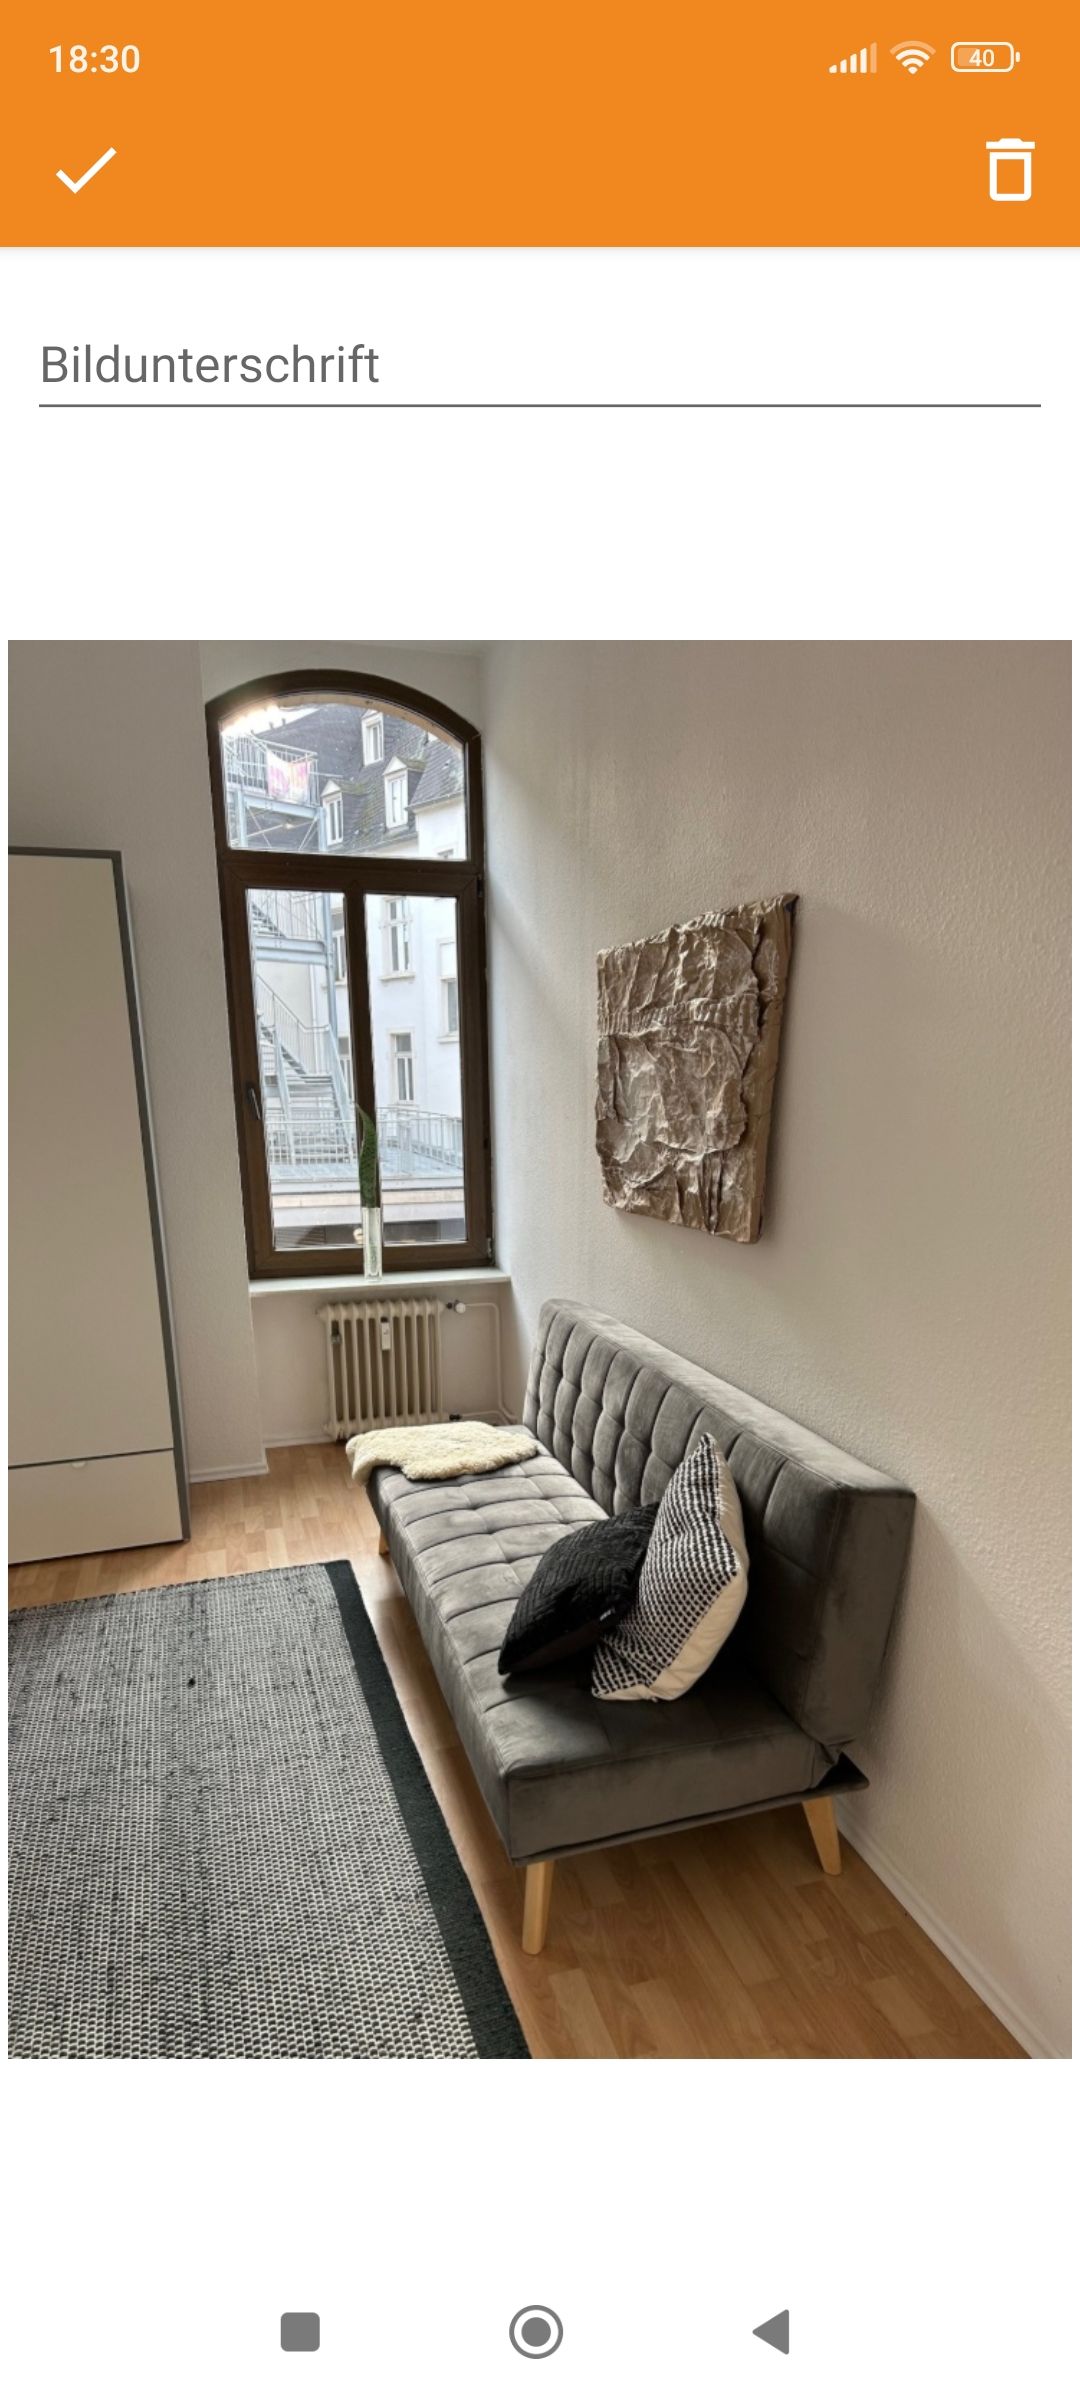 One noble room in a shared flat next to Trier railway station!